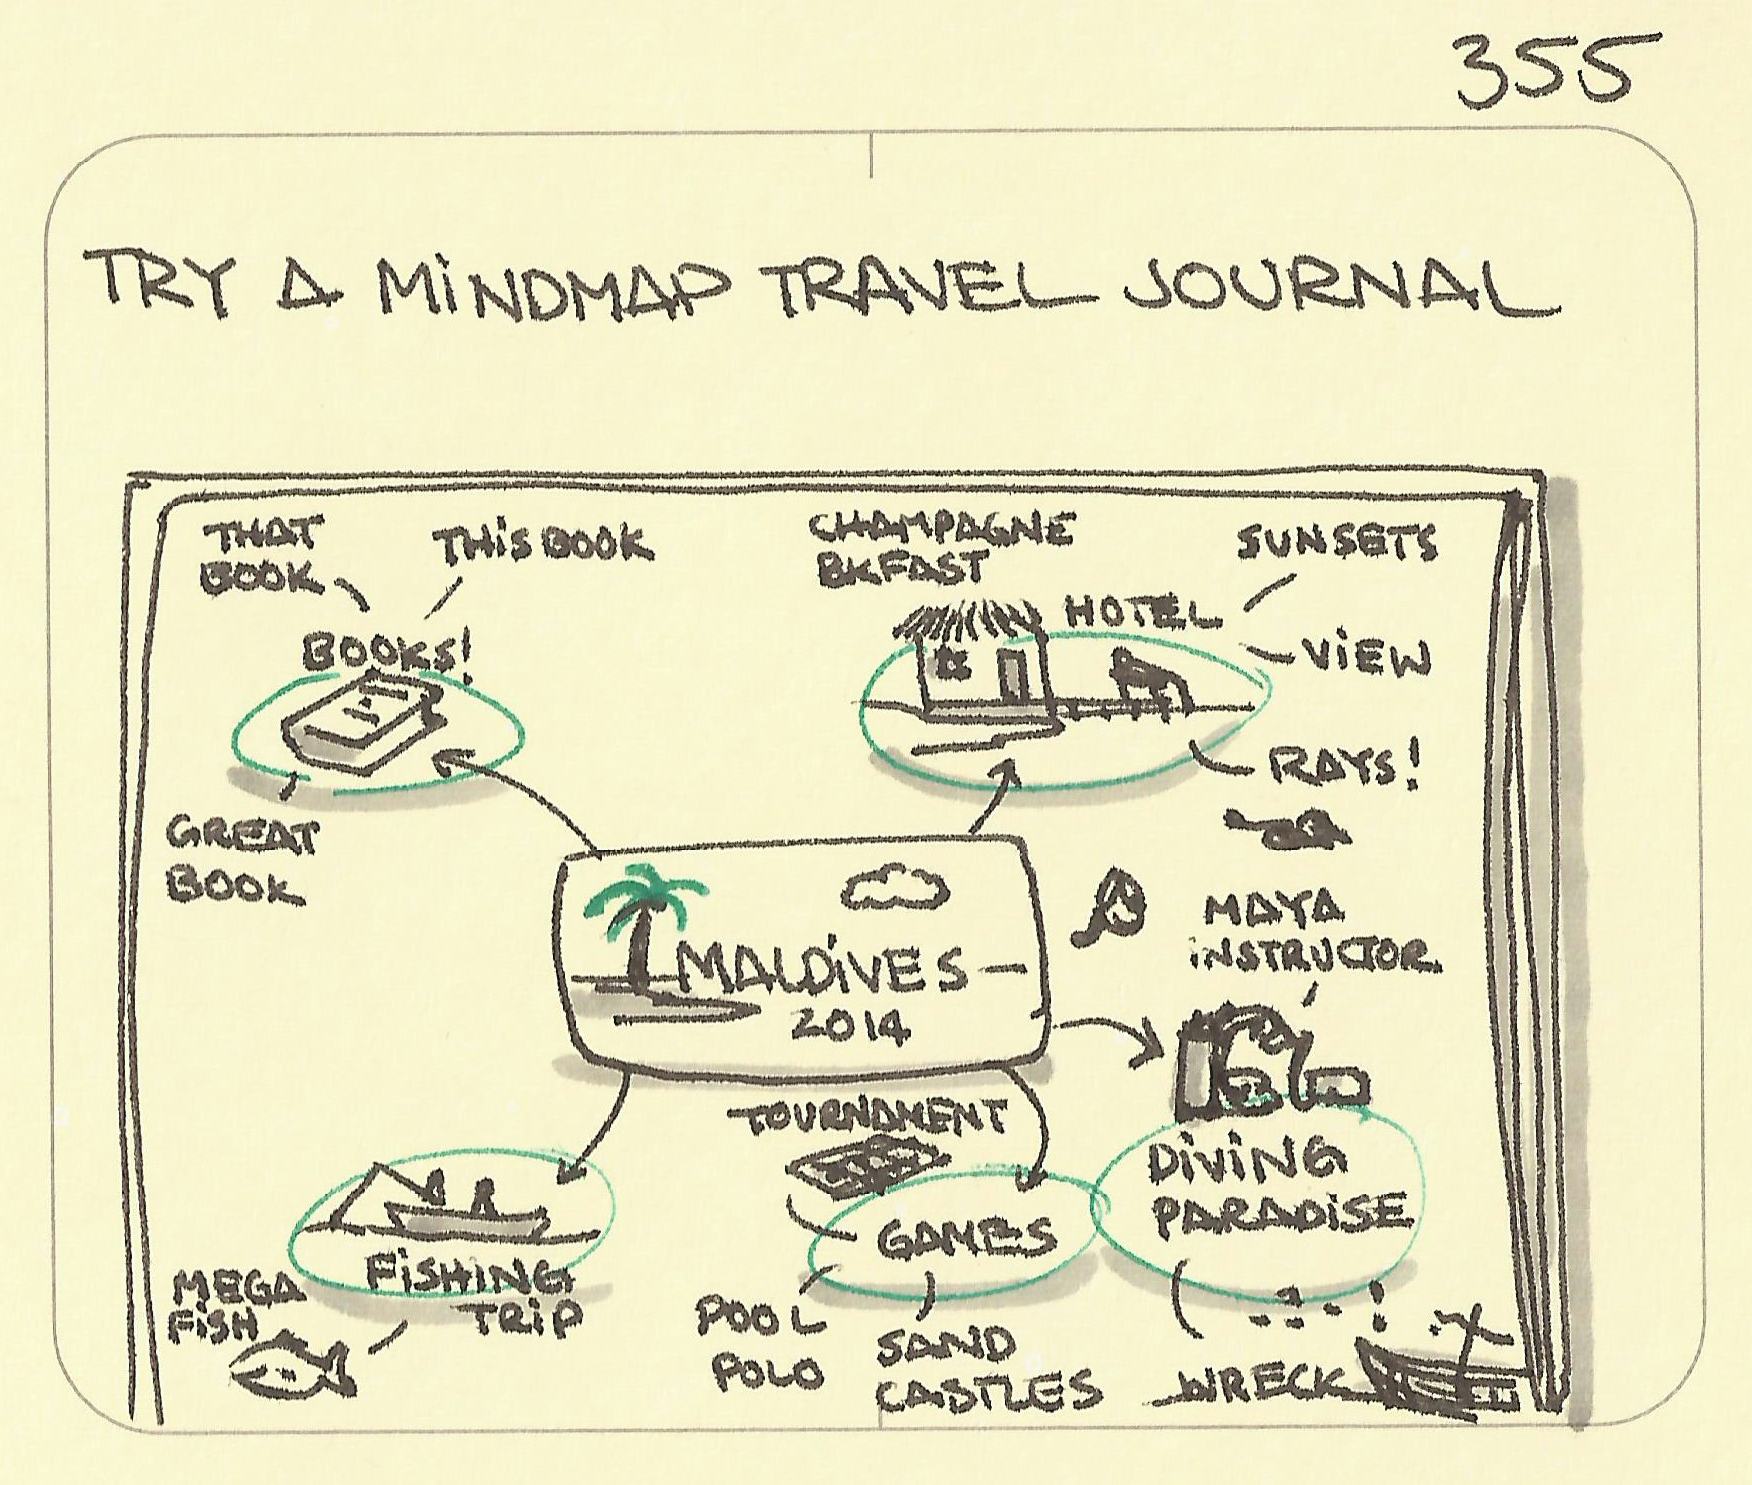 Try a mindmap travel journal - Sketchplanations